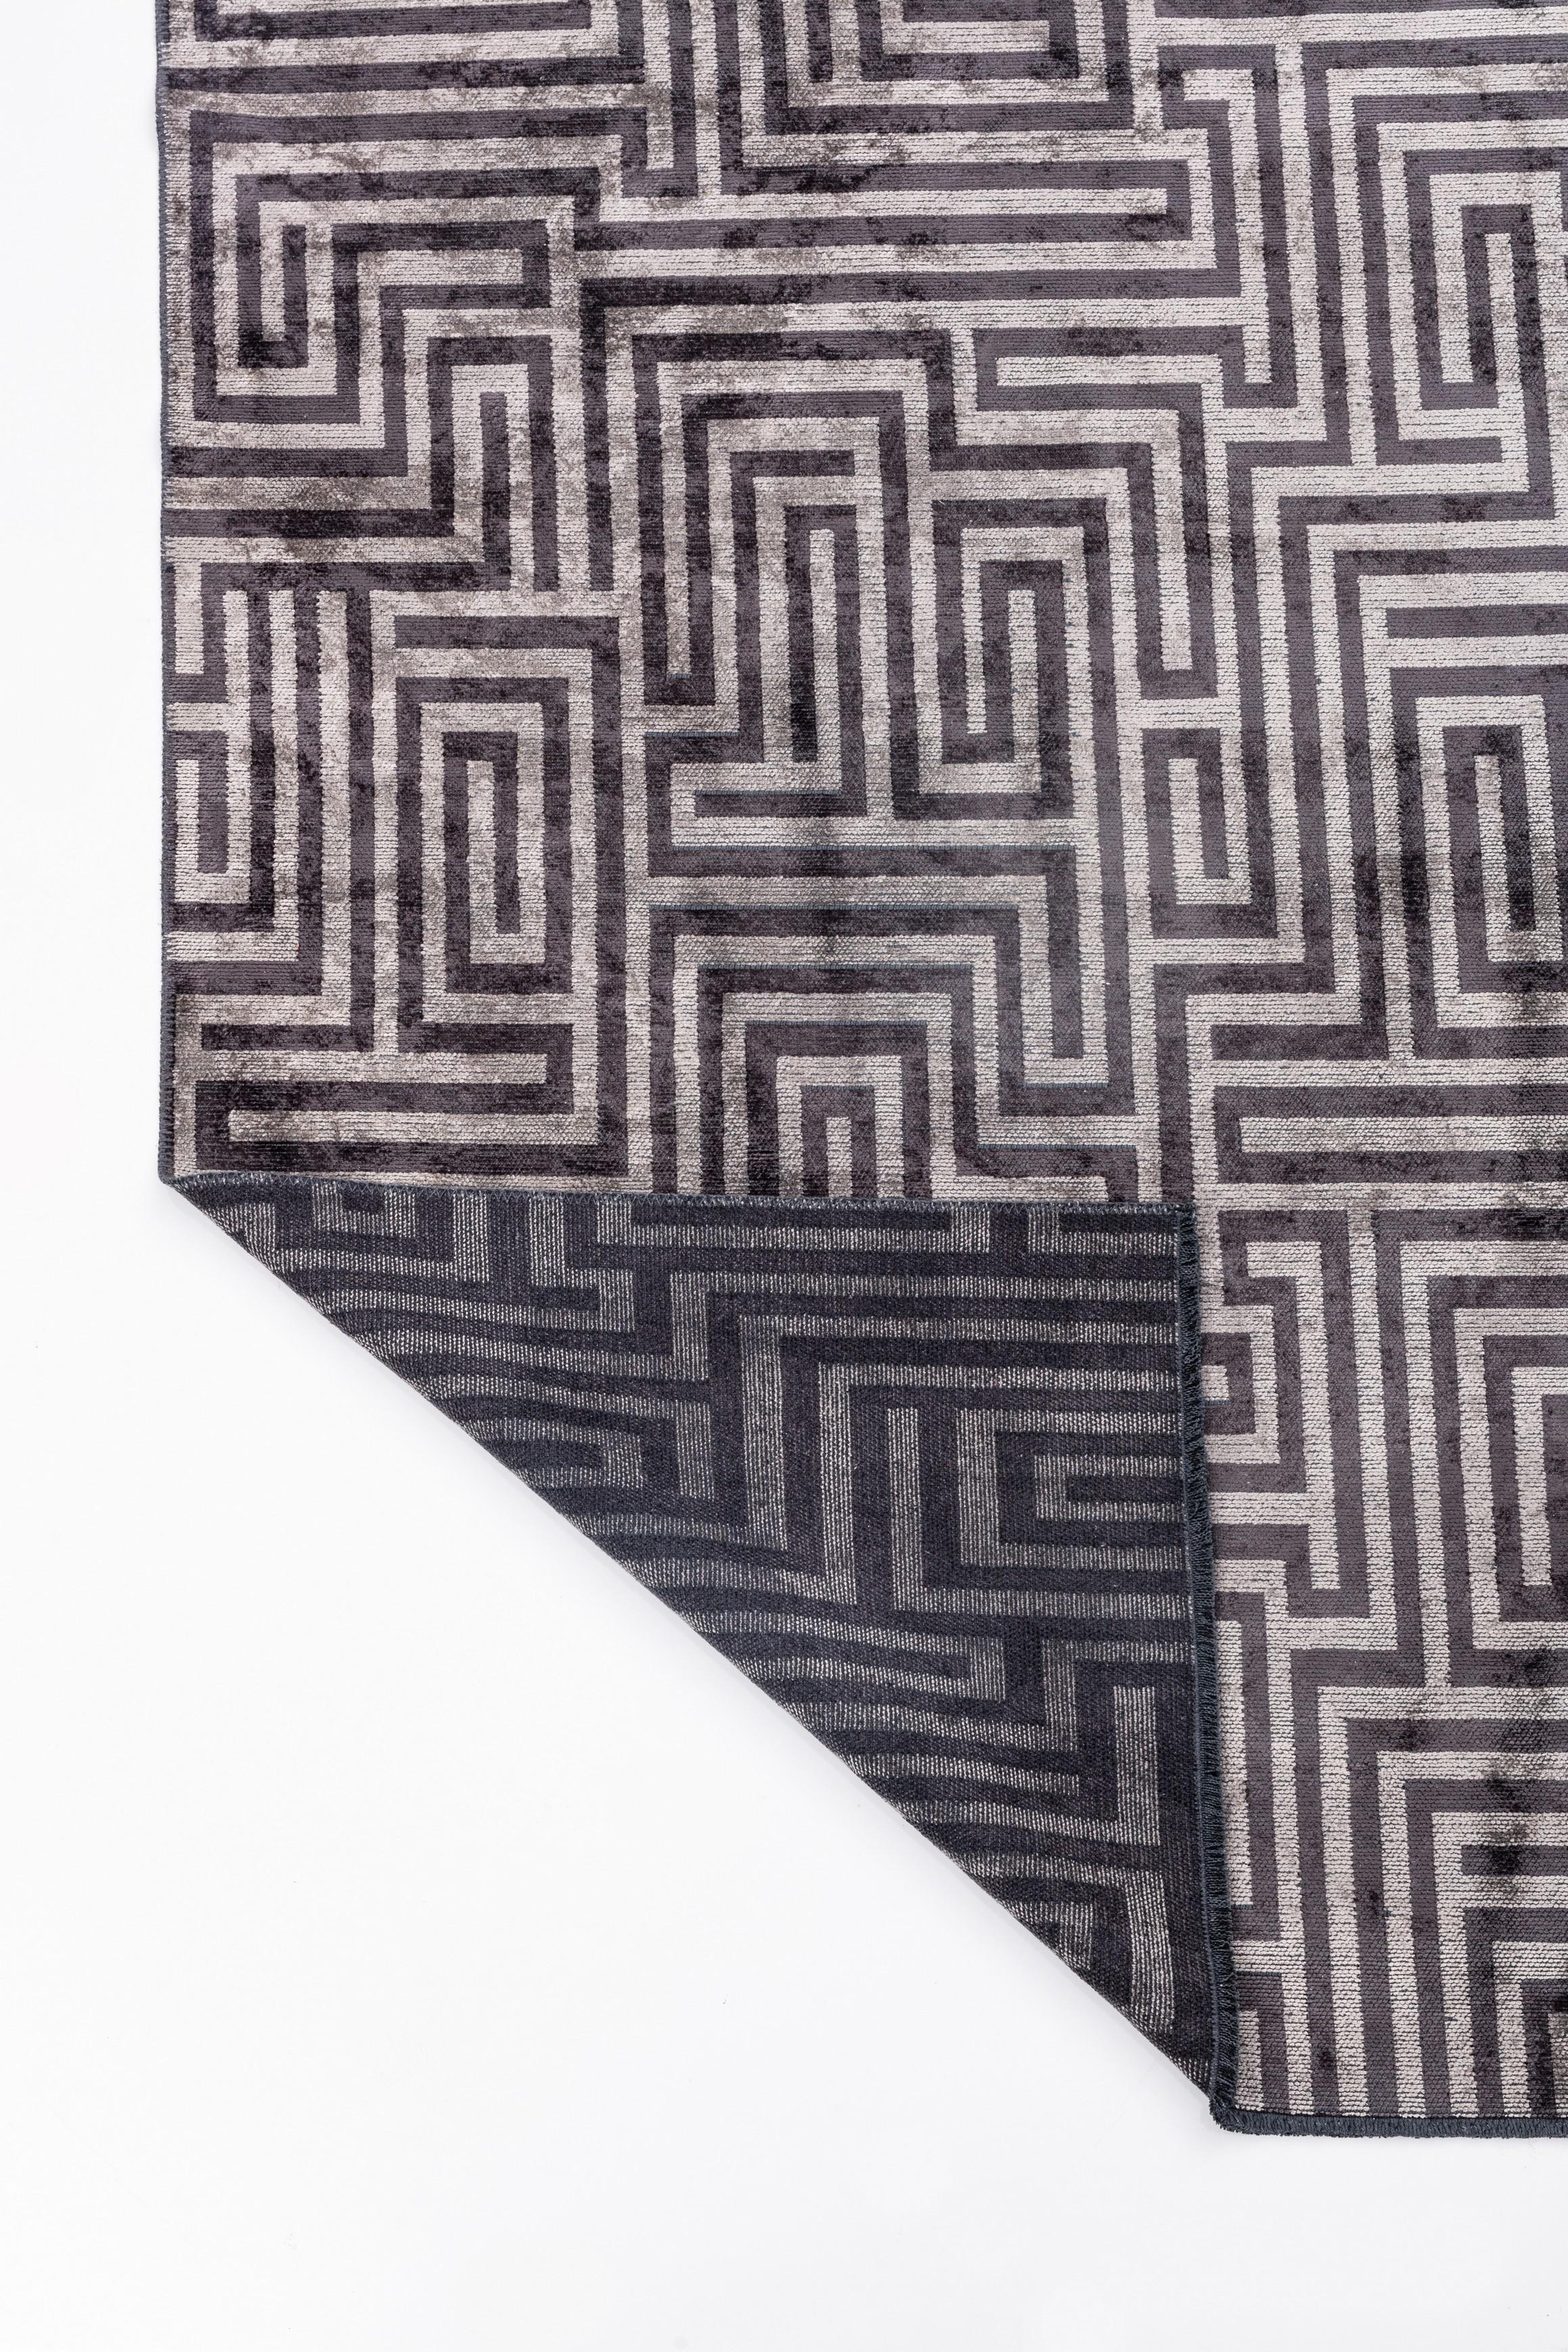 For Sale:  (Gray) Contemporary Geometric Luxury Area Rug 3